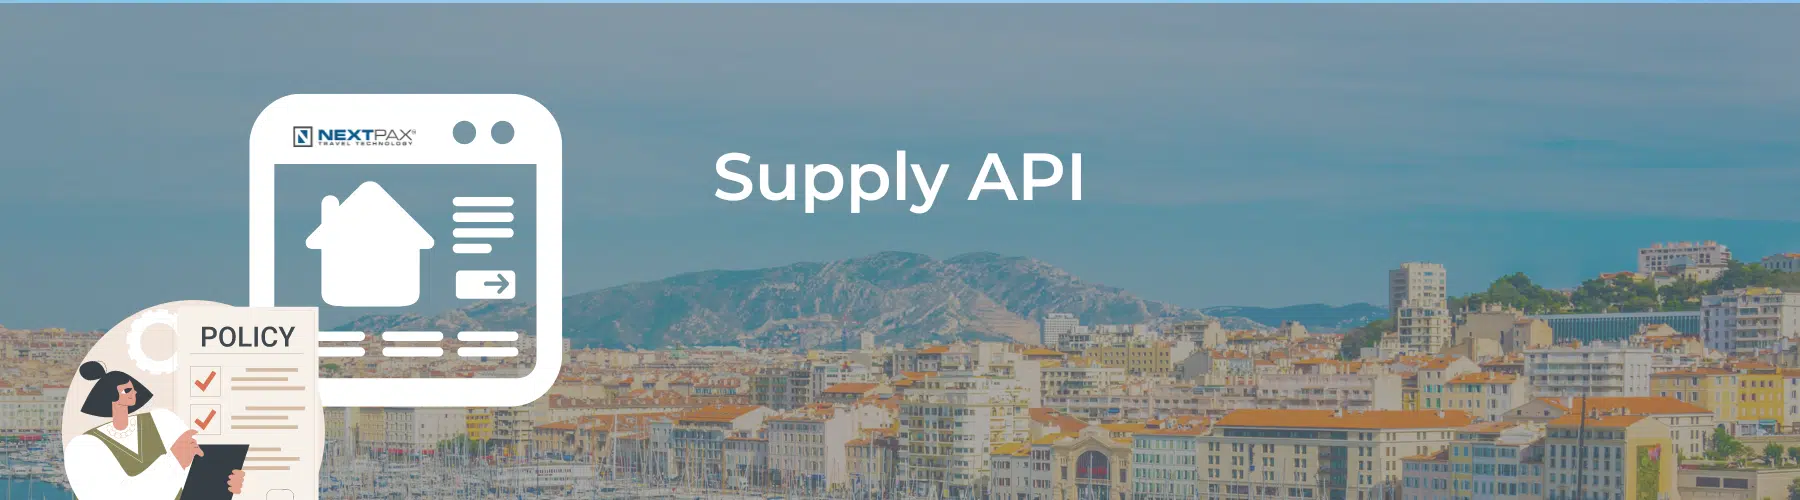 Supply API Product Updates: Property Policies and more